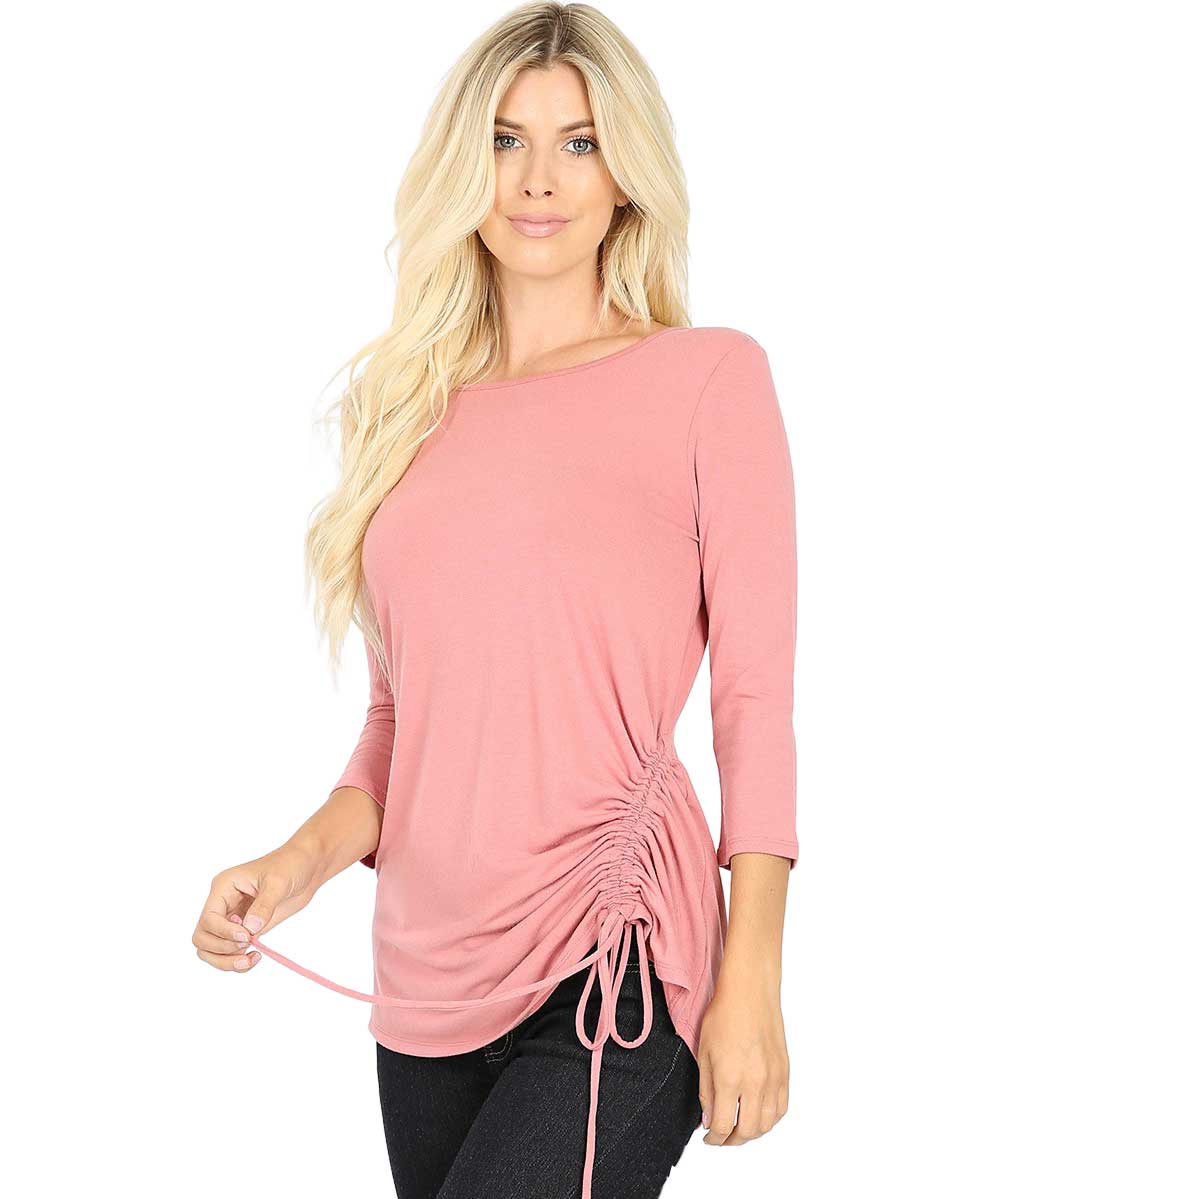 1887 - 3/4 Sleeve Ruched Tops DUSTY ROSE 3/4 Sleeve Round Neck Side Ruched 1887 - Medium